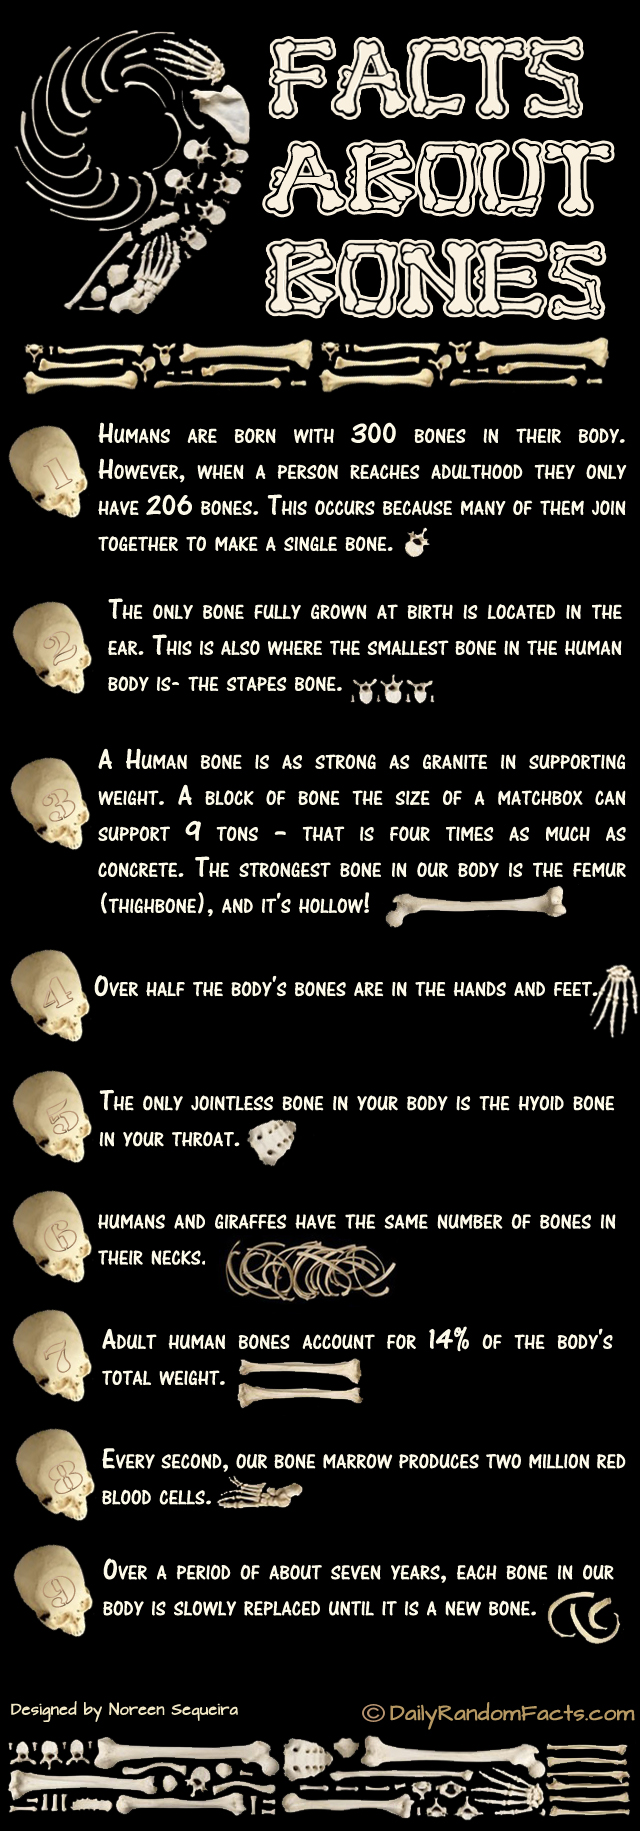 9 amazing facts about your bones!